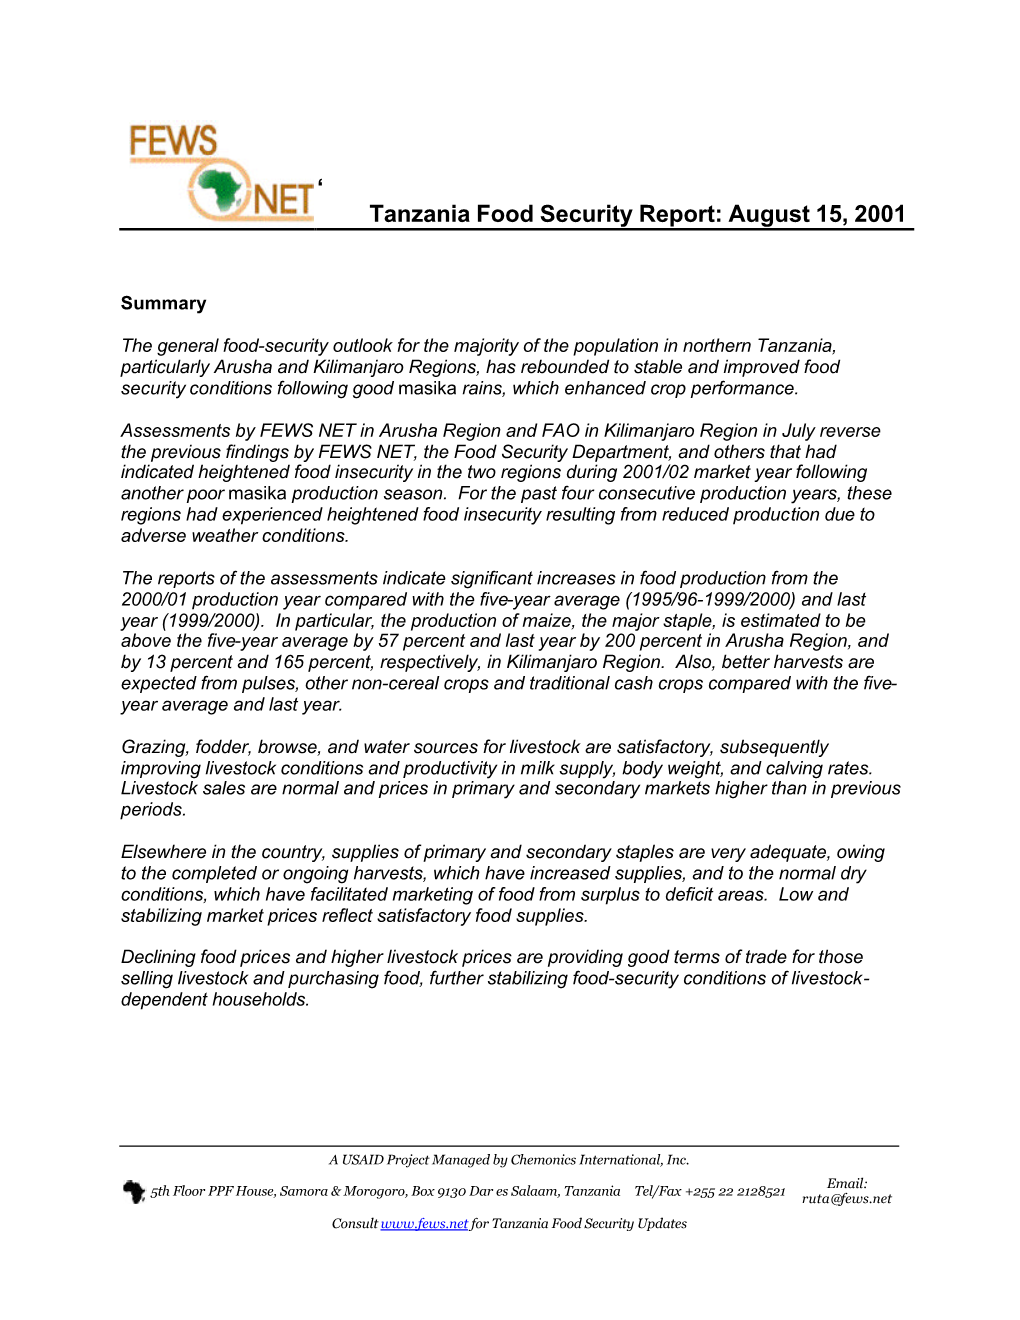 ' Tanzania Food Security Report: August 15, 2001